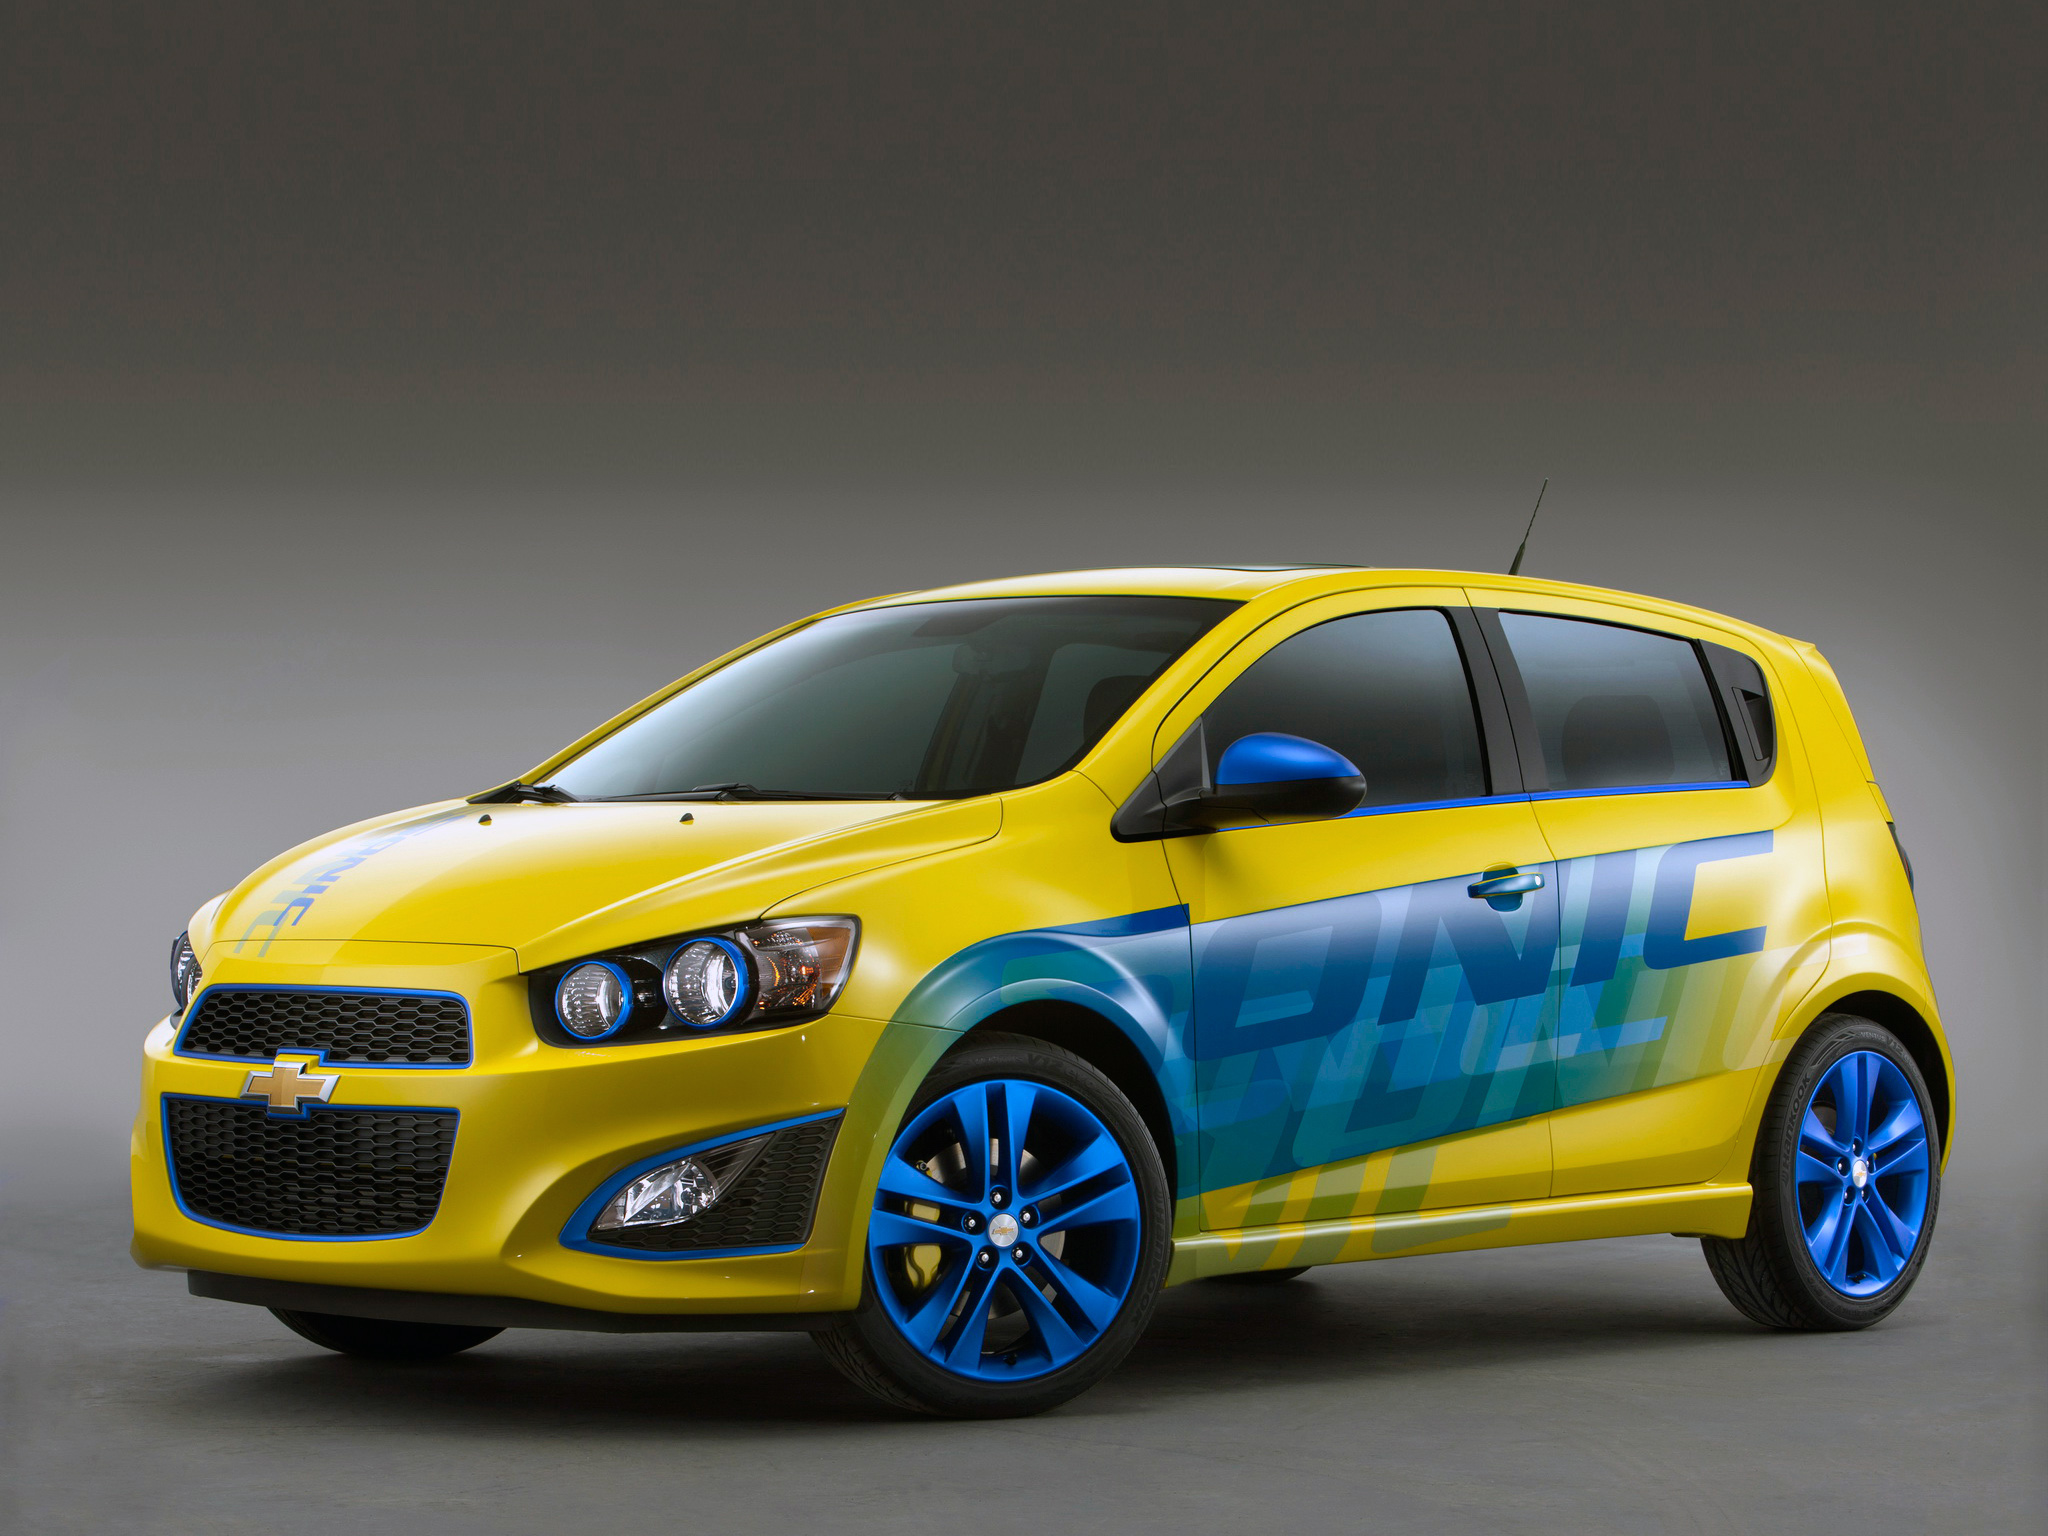 2013, Chevrolet, Performance, Sonic, Rs, Tuning, R s Wallpaper